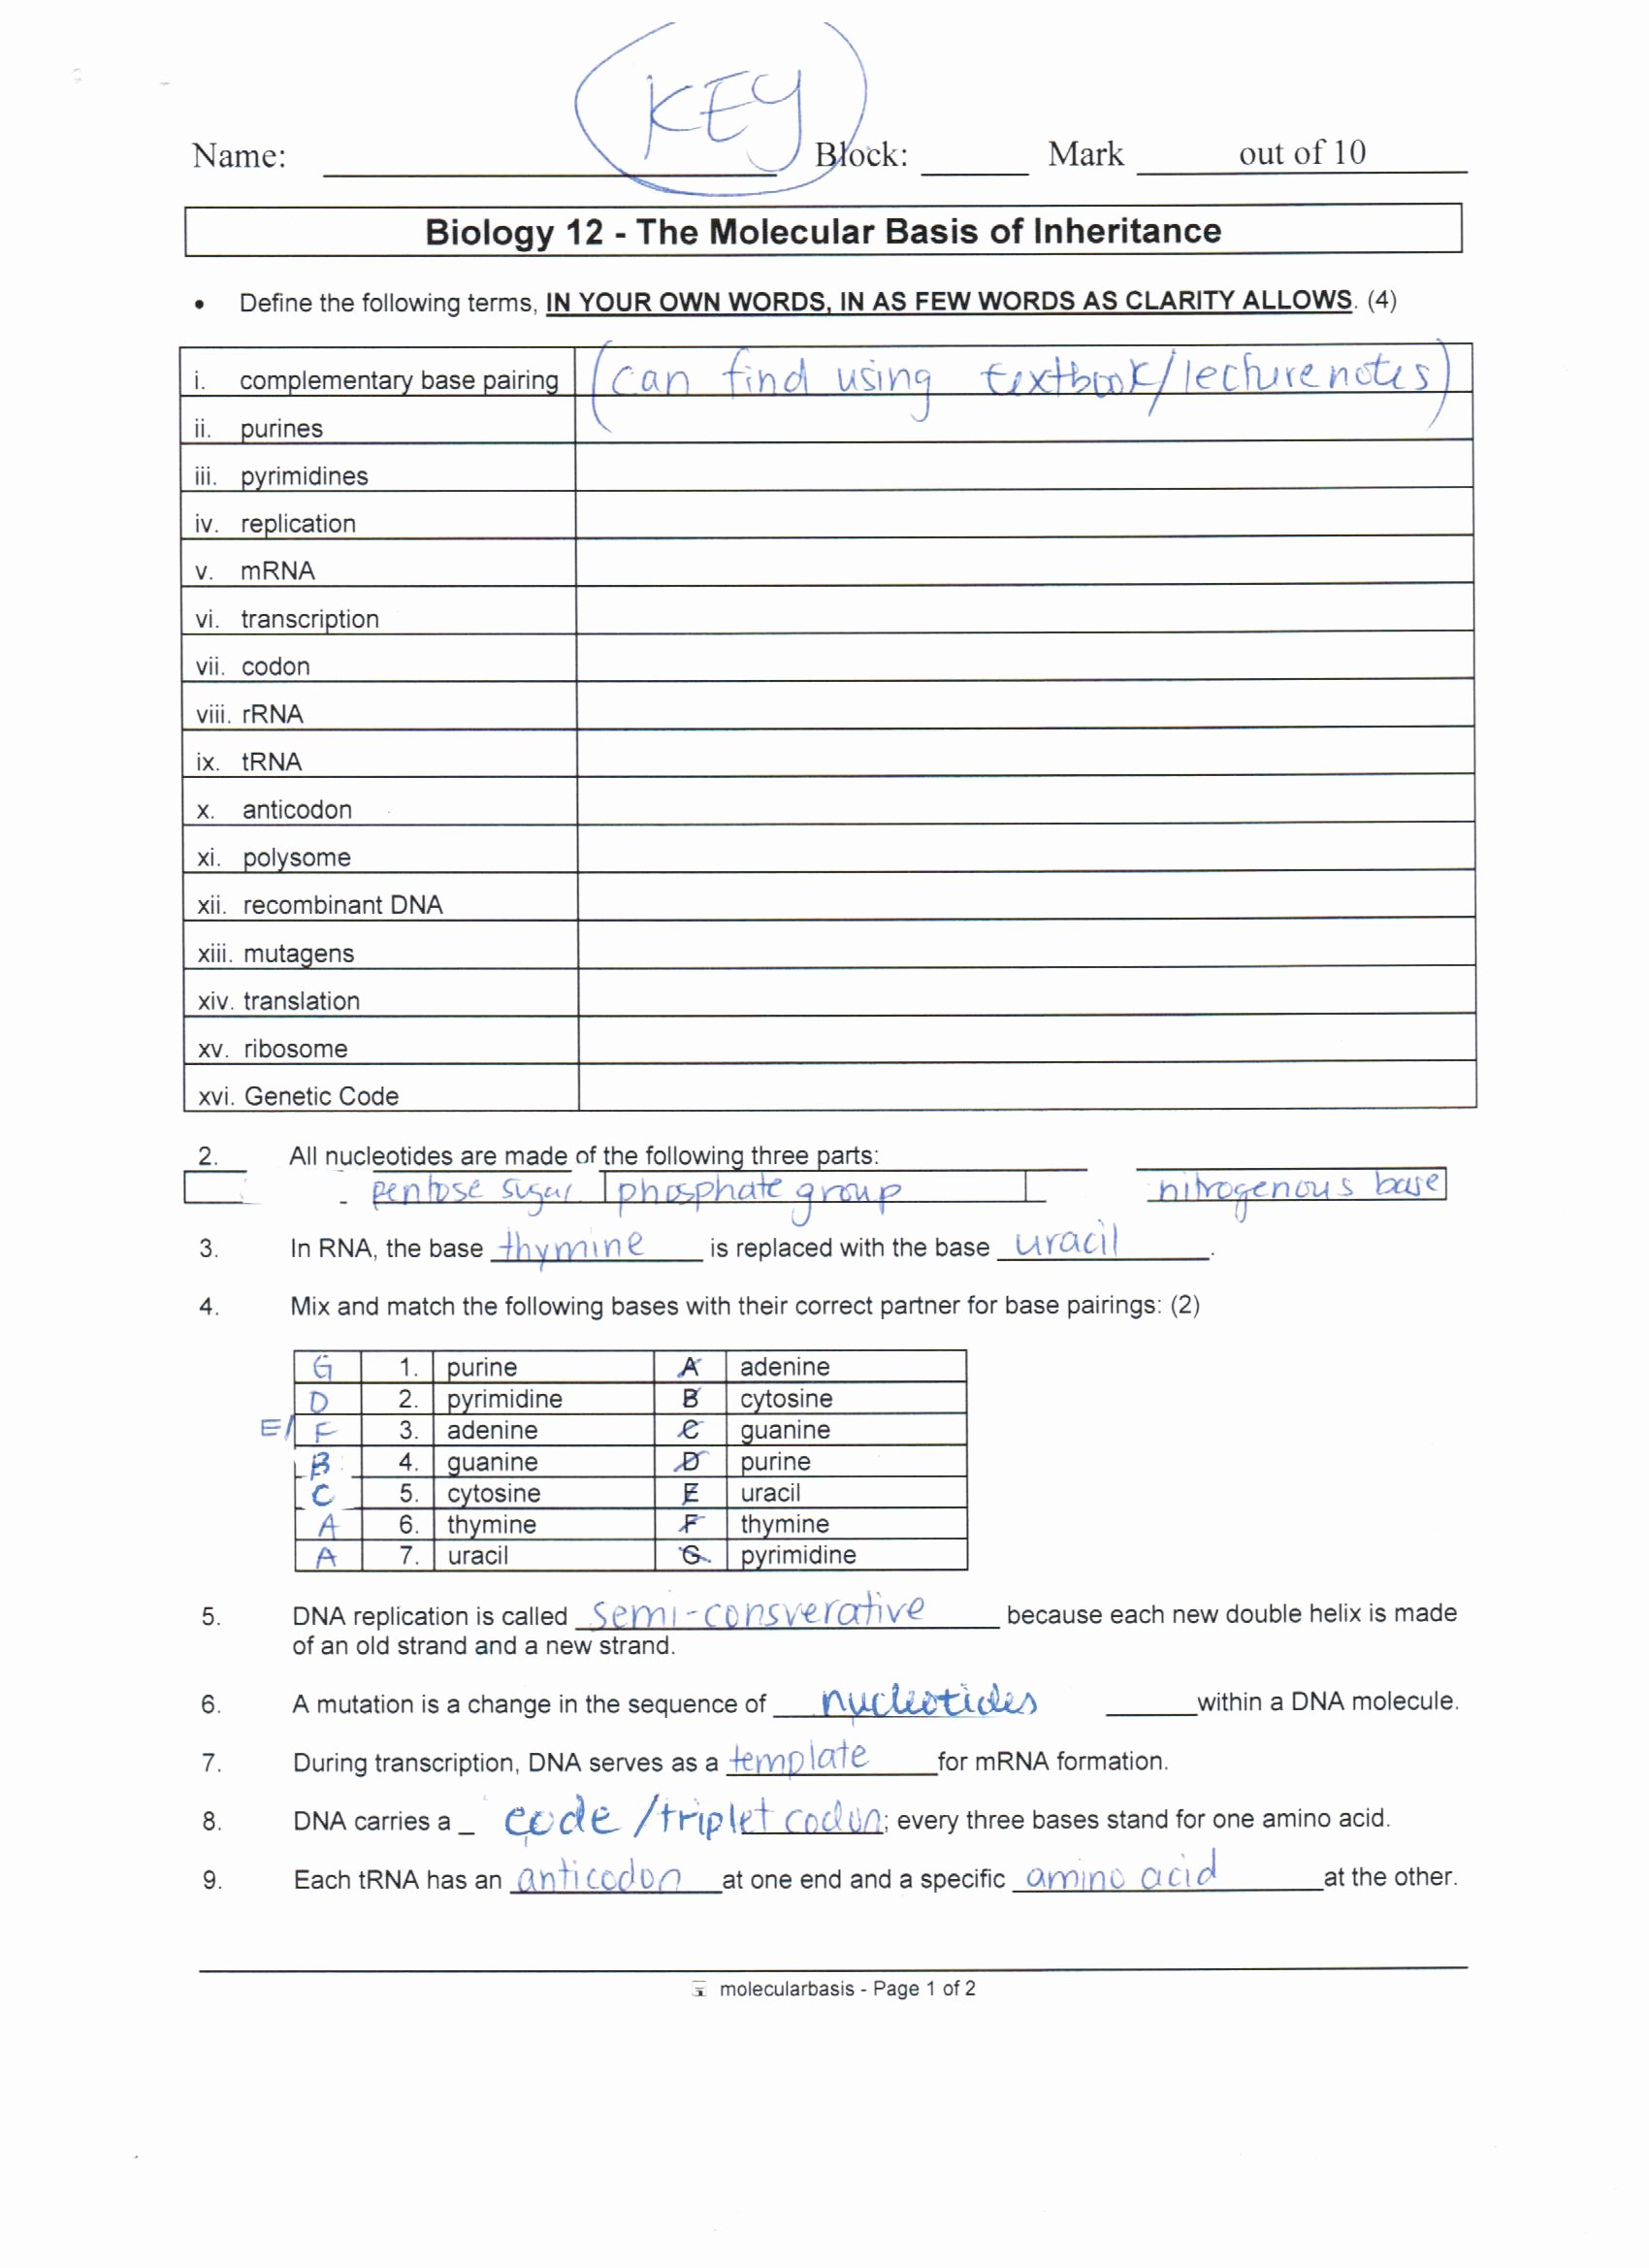 Mutations Worksheet Answer Key Beautiful Answer Key Dna Protein Synthesis and Mutations Review